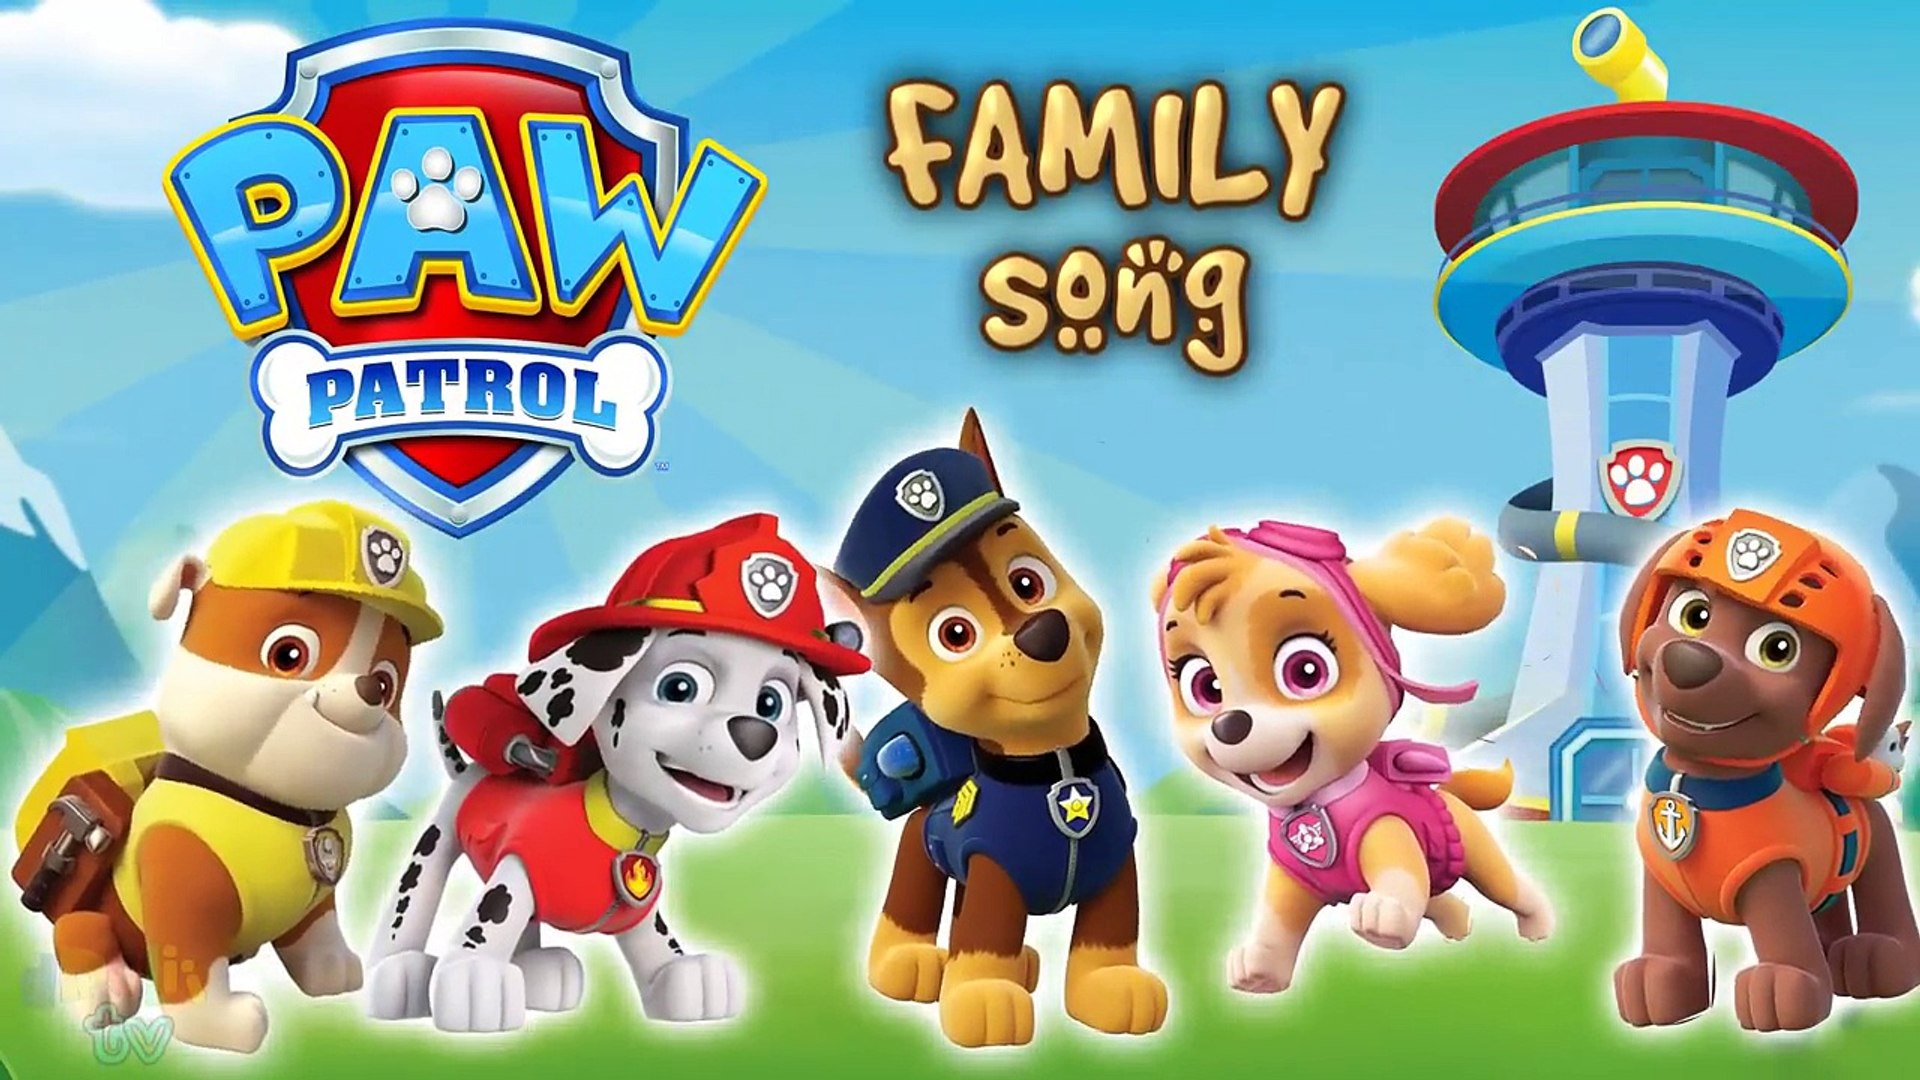 Paw Patrol Finger Family Songs | Chase, Rubble, Skye, Marshall | Nursery Rhymes and more - Dailymotion